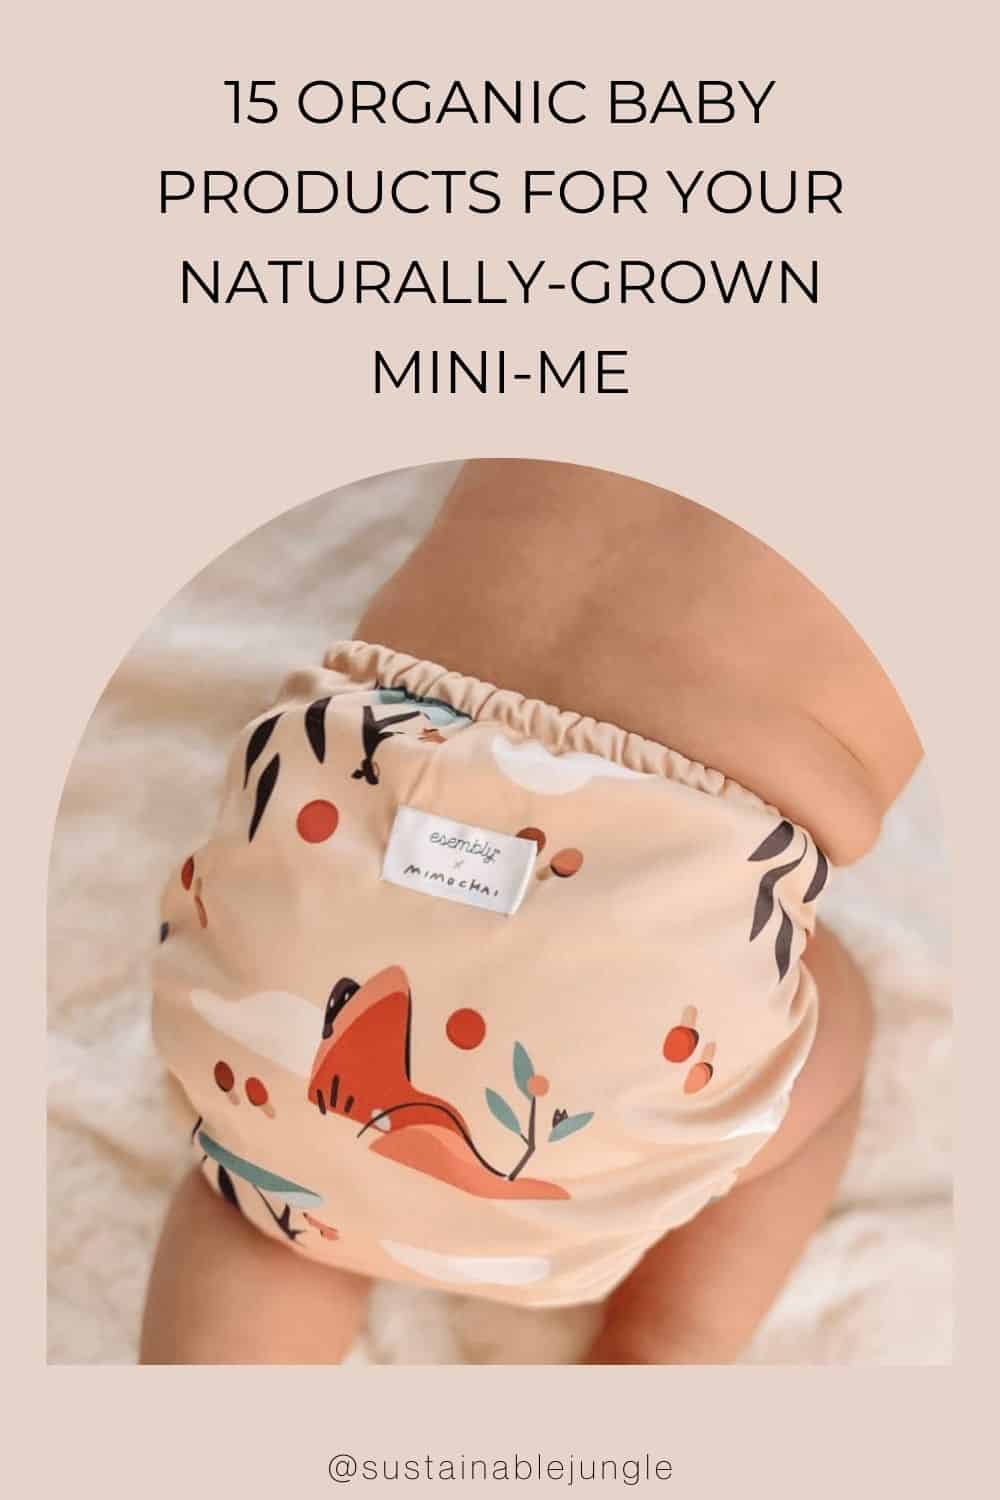 15 Organic Baby Products For Your Naturally-Grown Mini-Me Image by Esembly #organicbabyproducts #bestorganicbabyproducts #organicproductsforbaby #naturalbabyproducts #allnaturalbabyproducts #organicbabysupplies #sustainablejungle